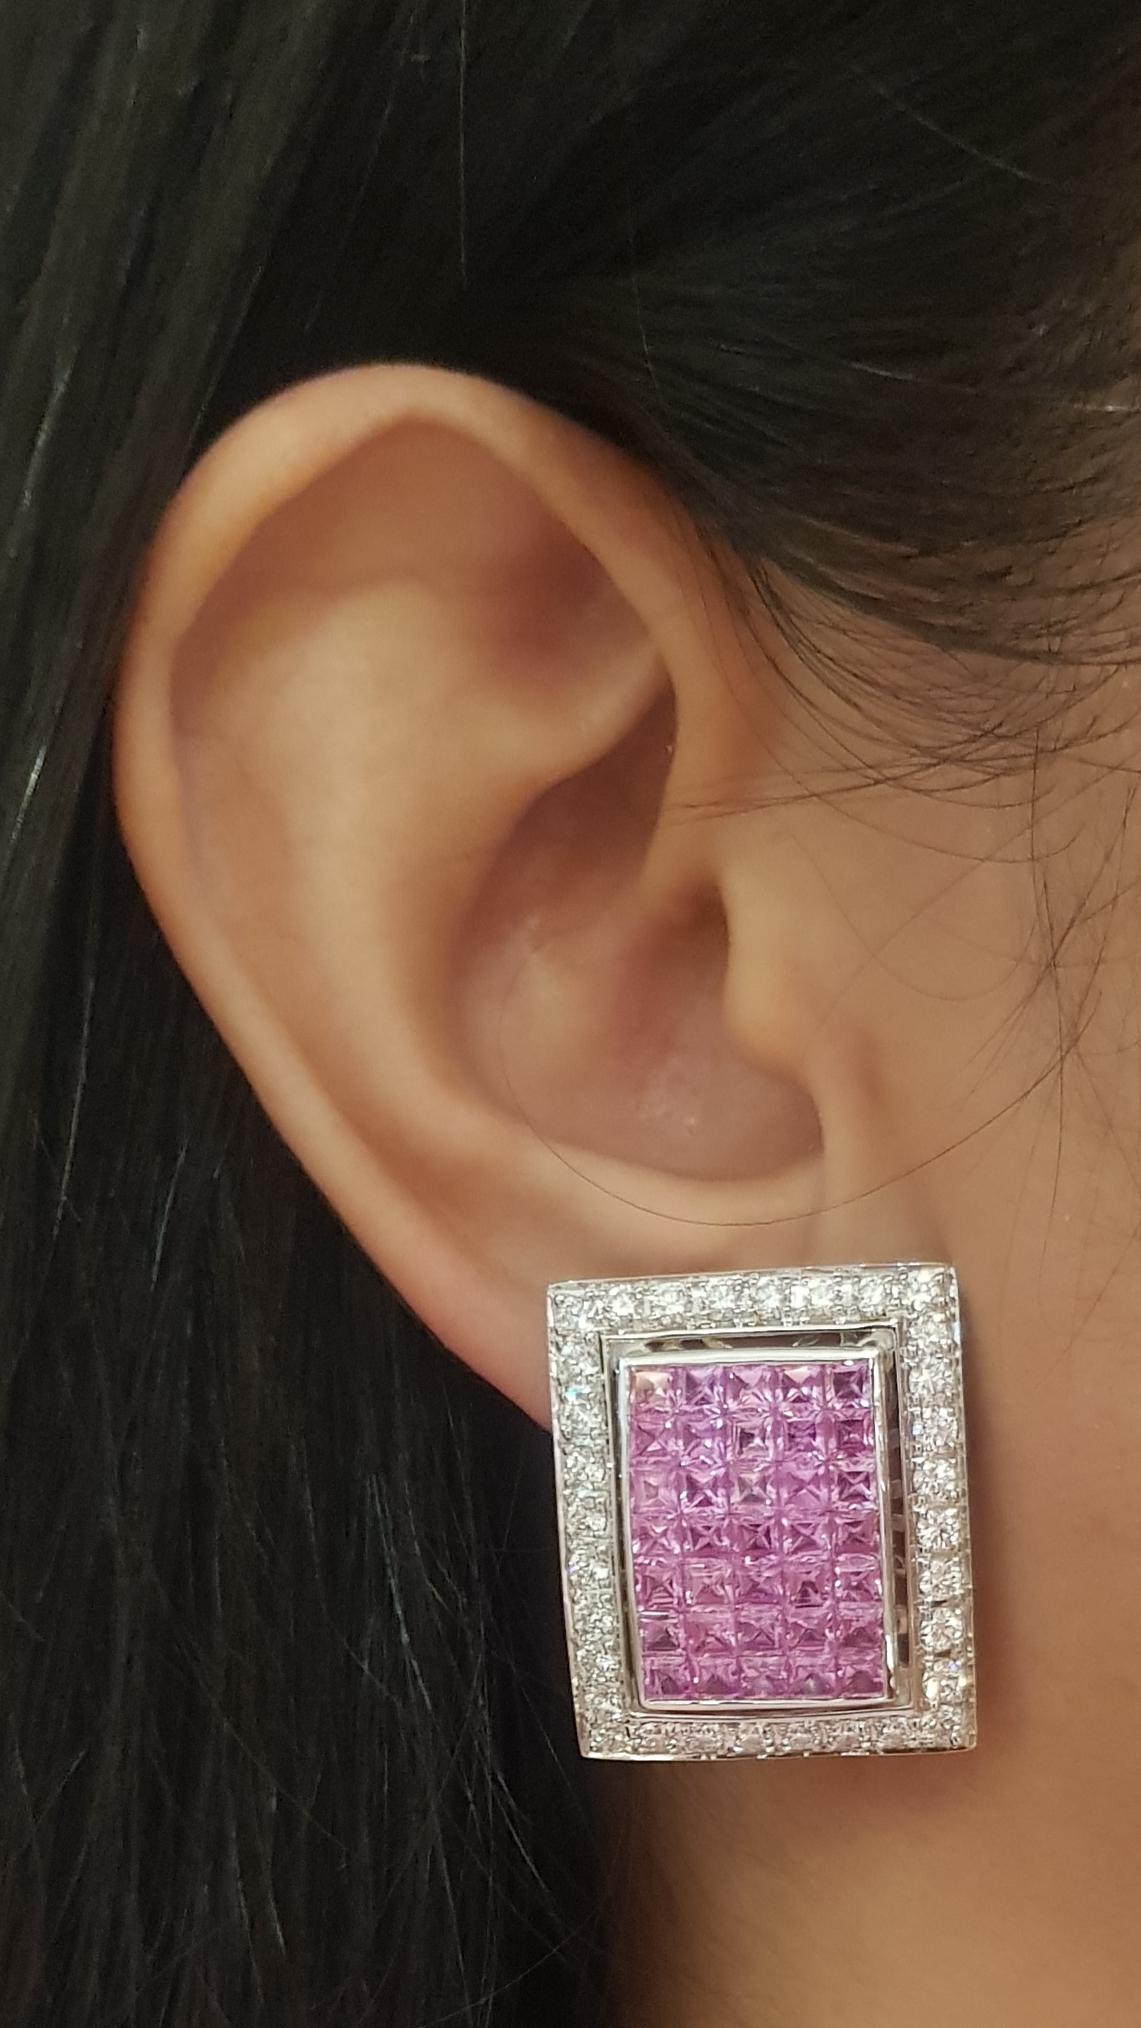 Pink Sapphire 11.78 carats with Diamond 2.74 carats Earrings set in 18K White Gold Settings

Width: 2.2 cm 
Length: 2.6  cm
Total Weight: 23.09 grams

